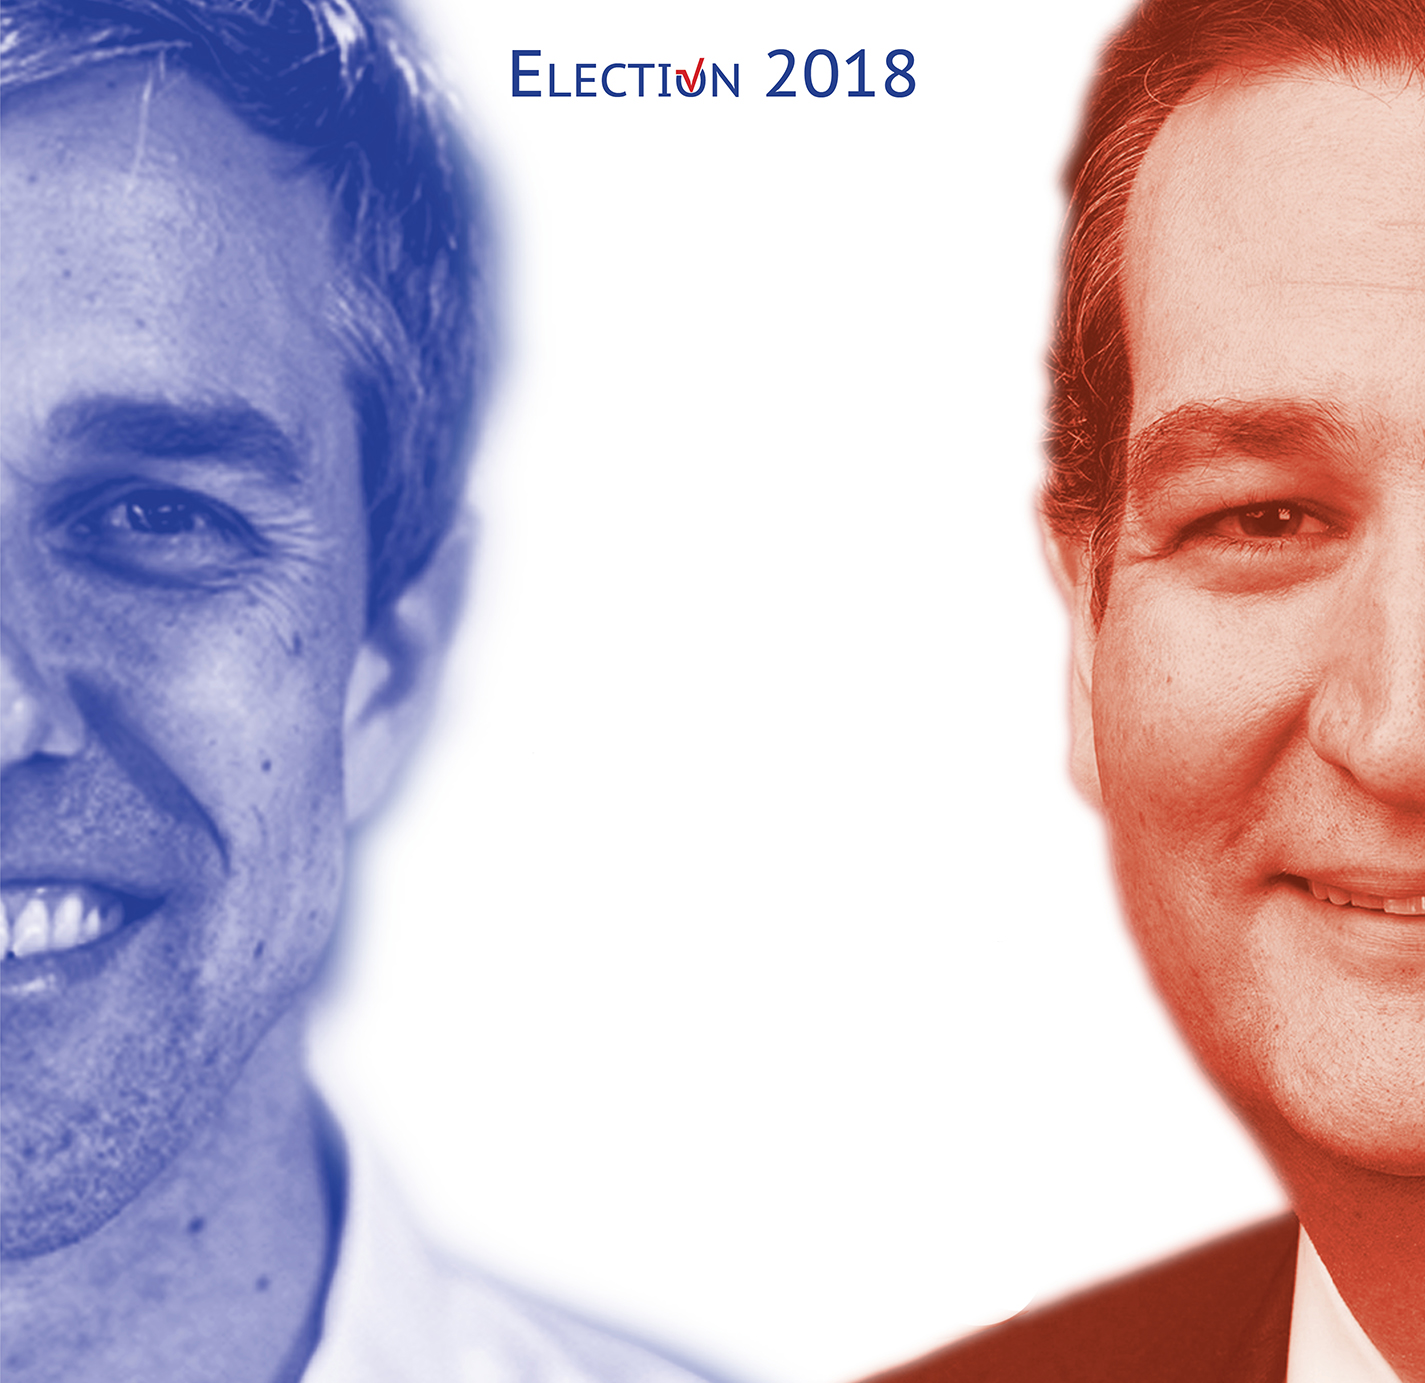 Democrat U.S. Rep. Beto O’Rourke faces Republican U.S. Sen. Ted Cruz in one of the most closely watched races of this year’s midterm election.